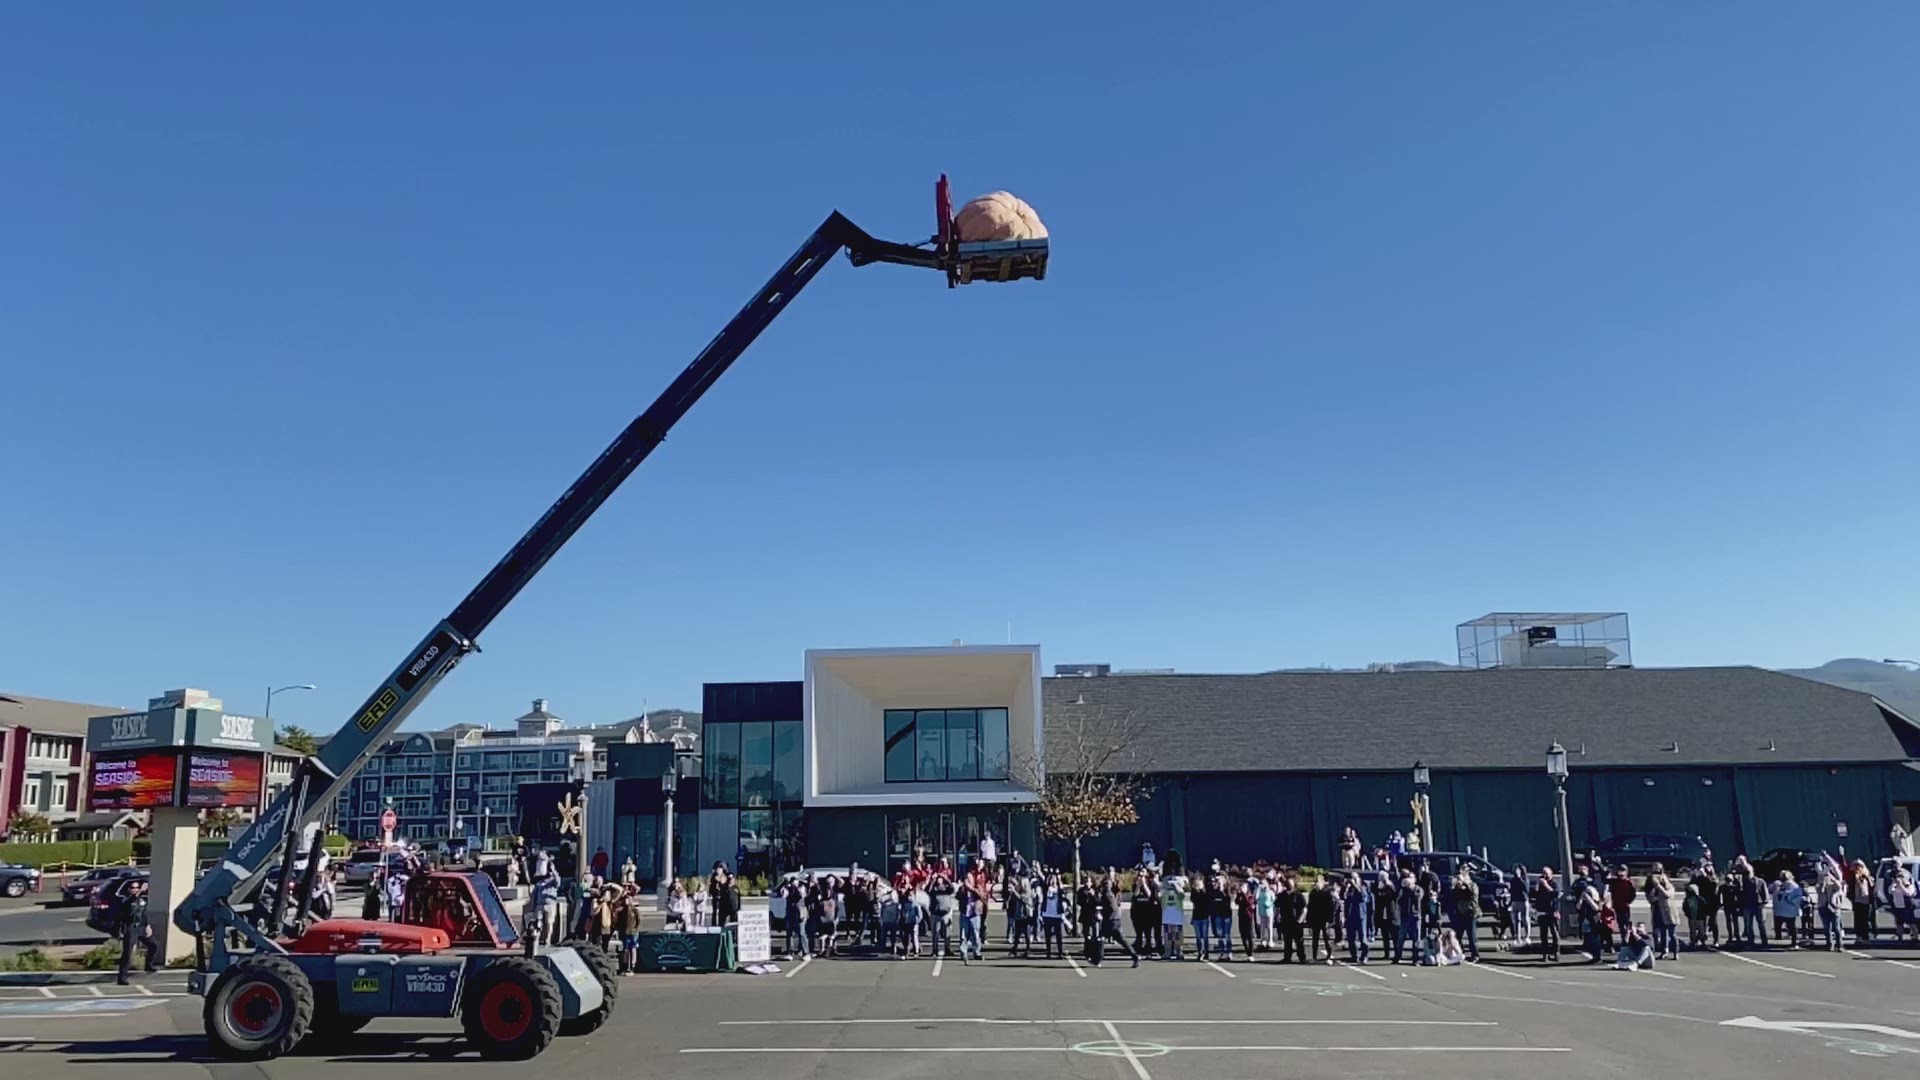 There was a giant pumpkin drop in the downtown parking lot of Seaside, Oregon at noon today. 

The event was put on by the Seaside Downtown Development Association.